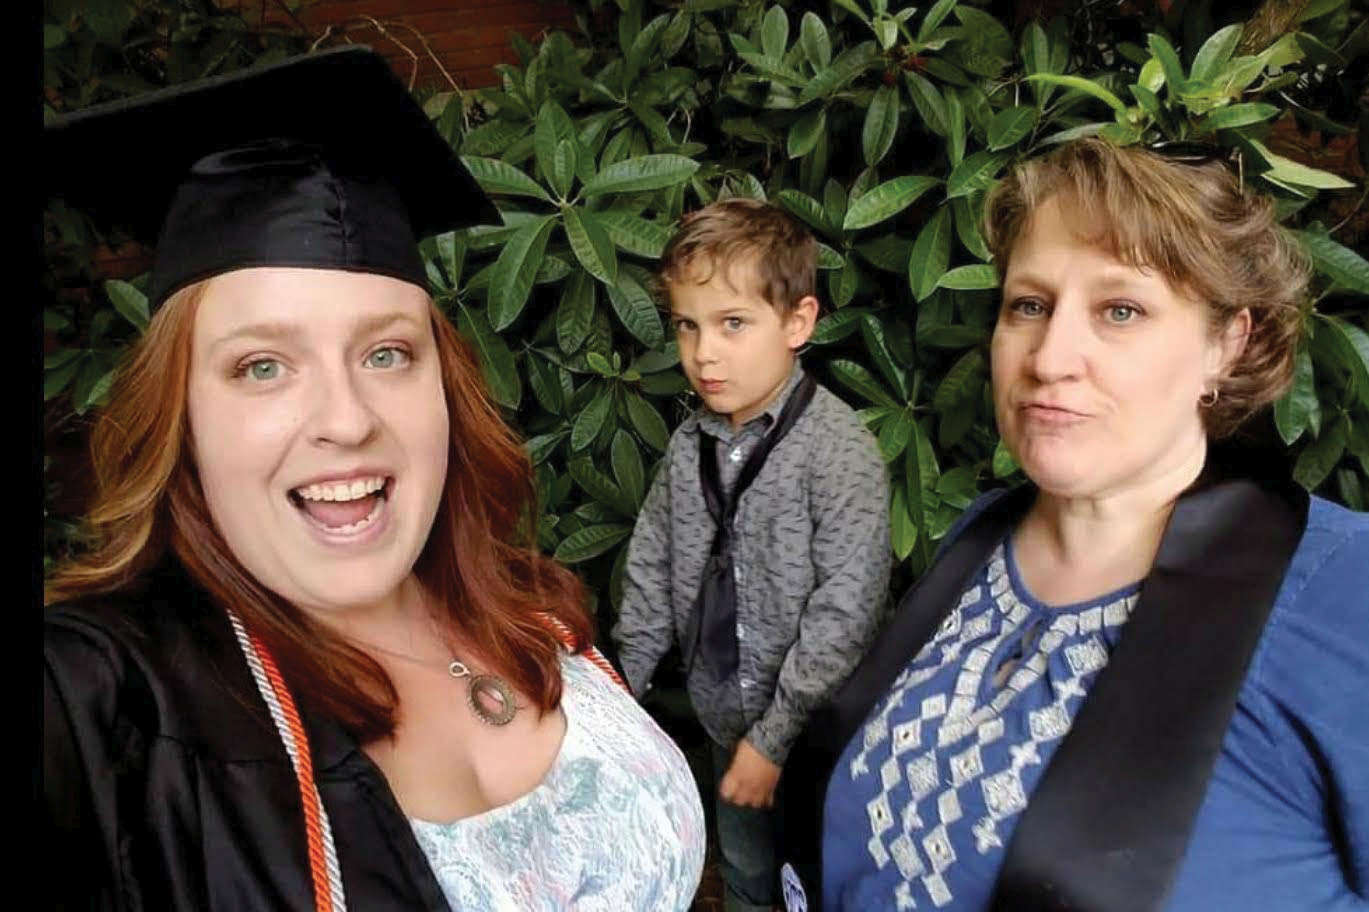 Oregon student parent with her son and mother.